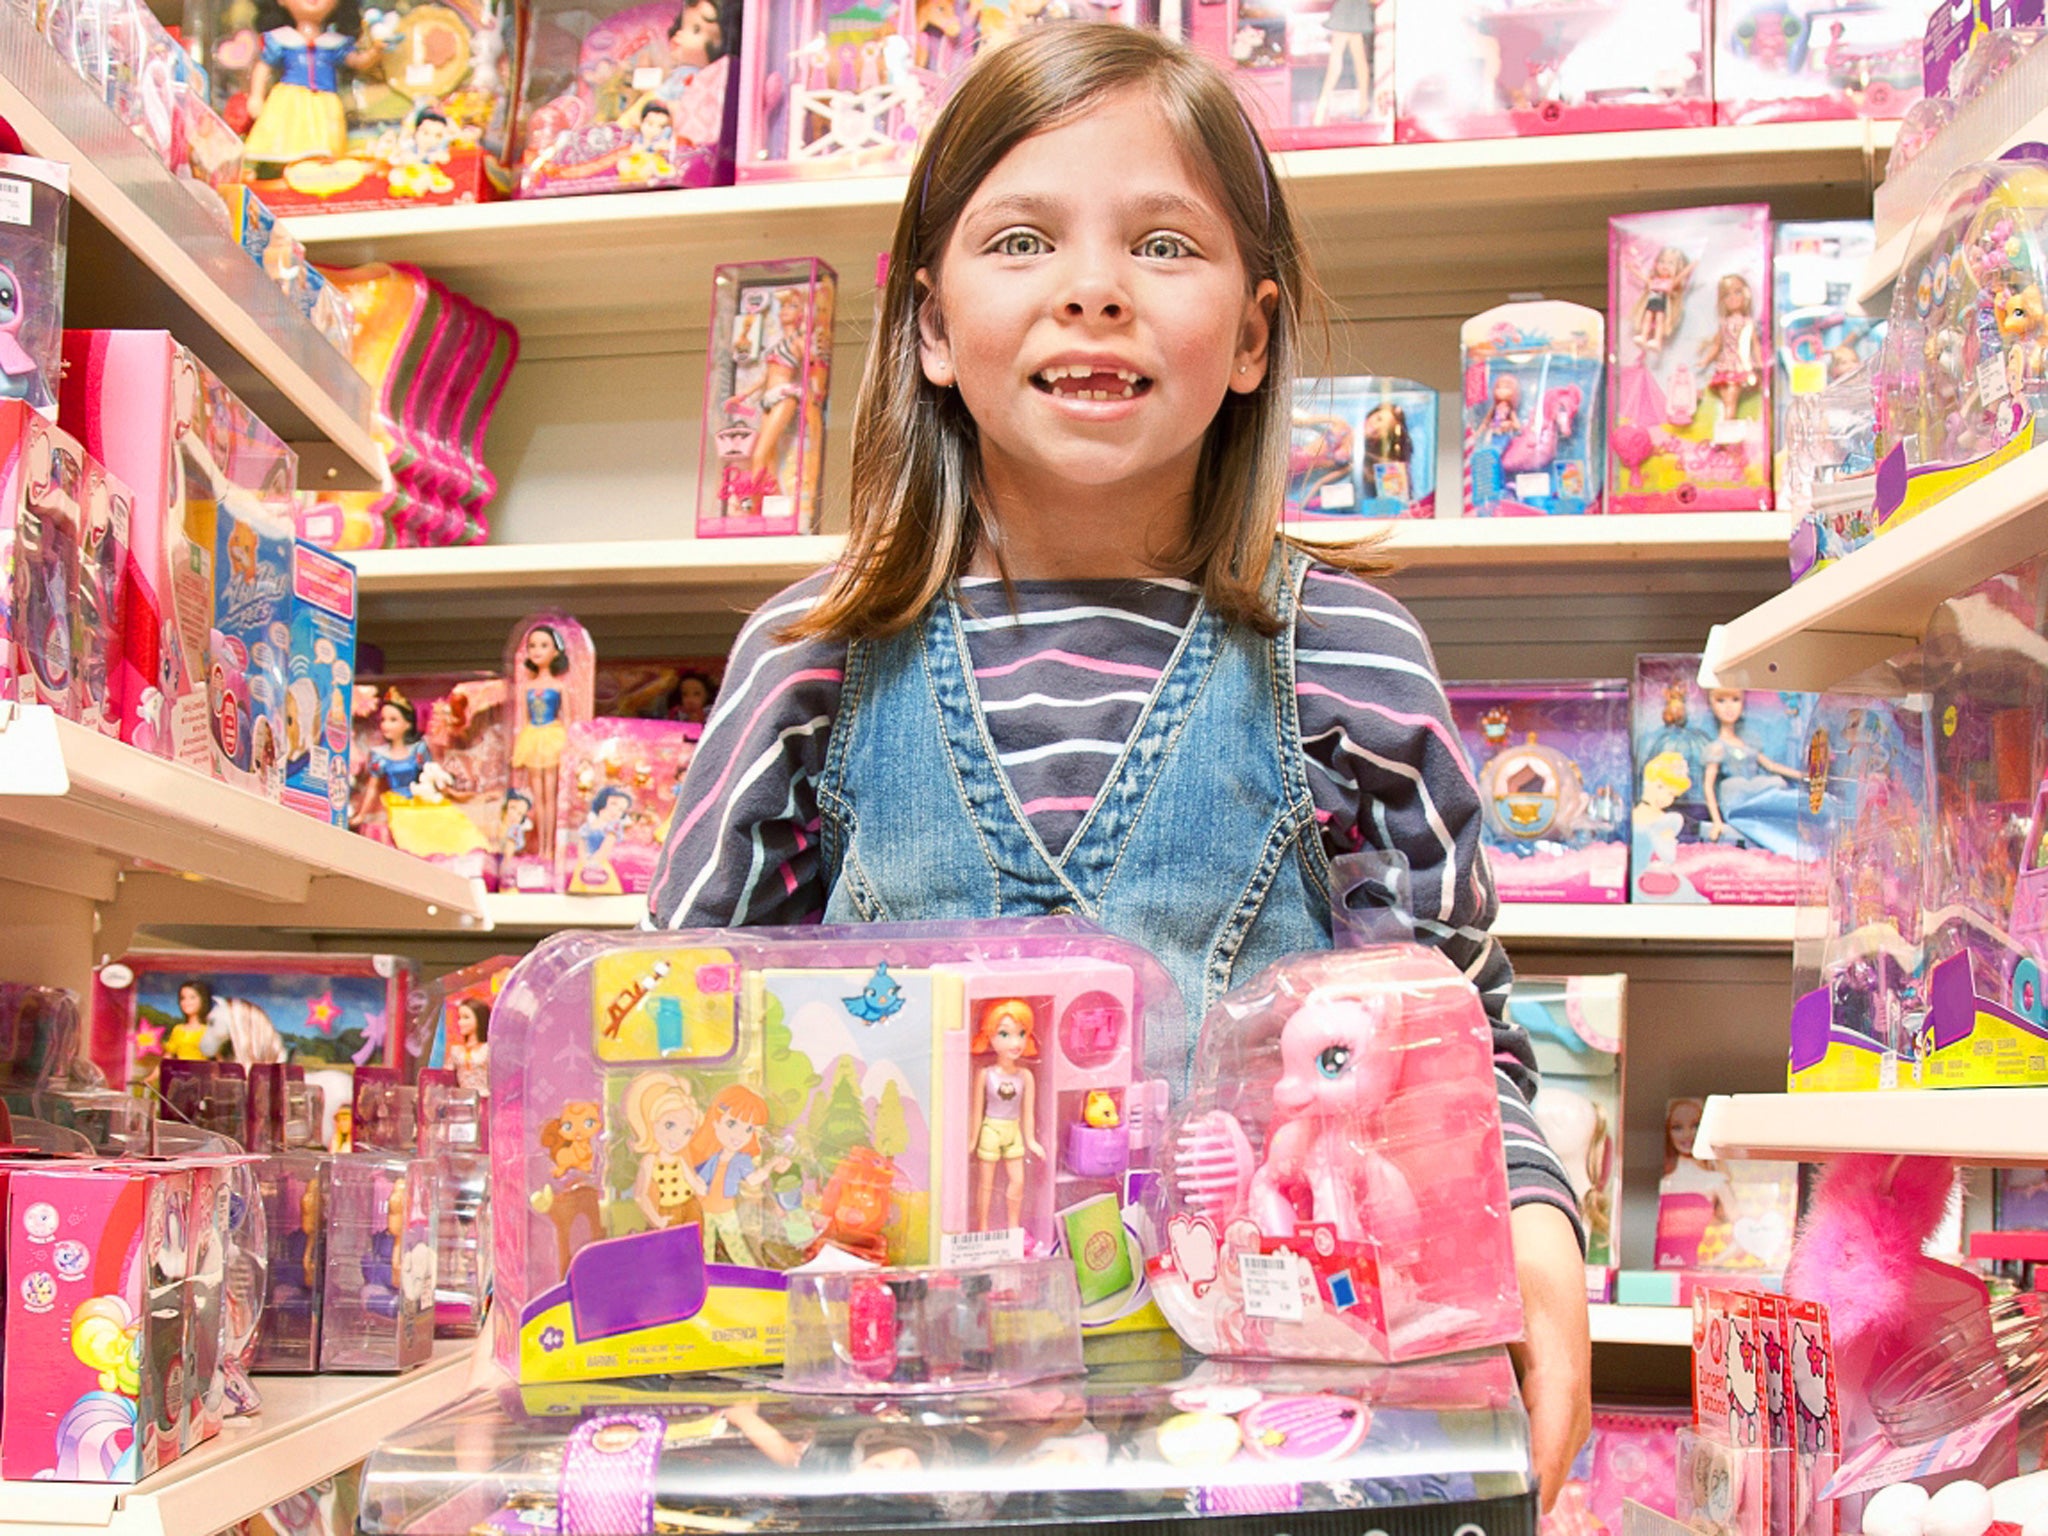 You're kidding: shops often sort toys into 'boy' and 'girl' aisles